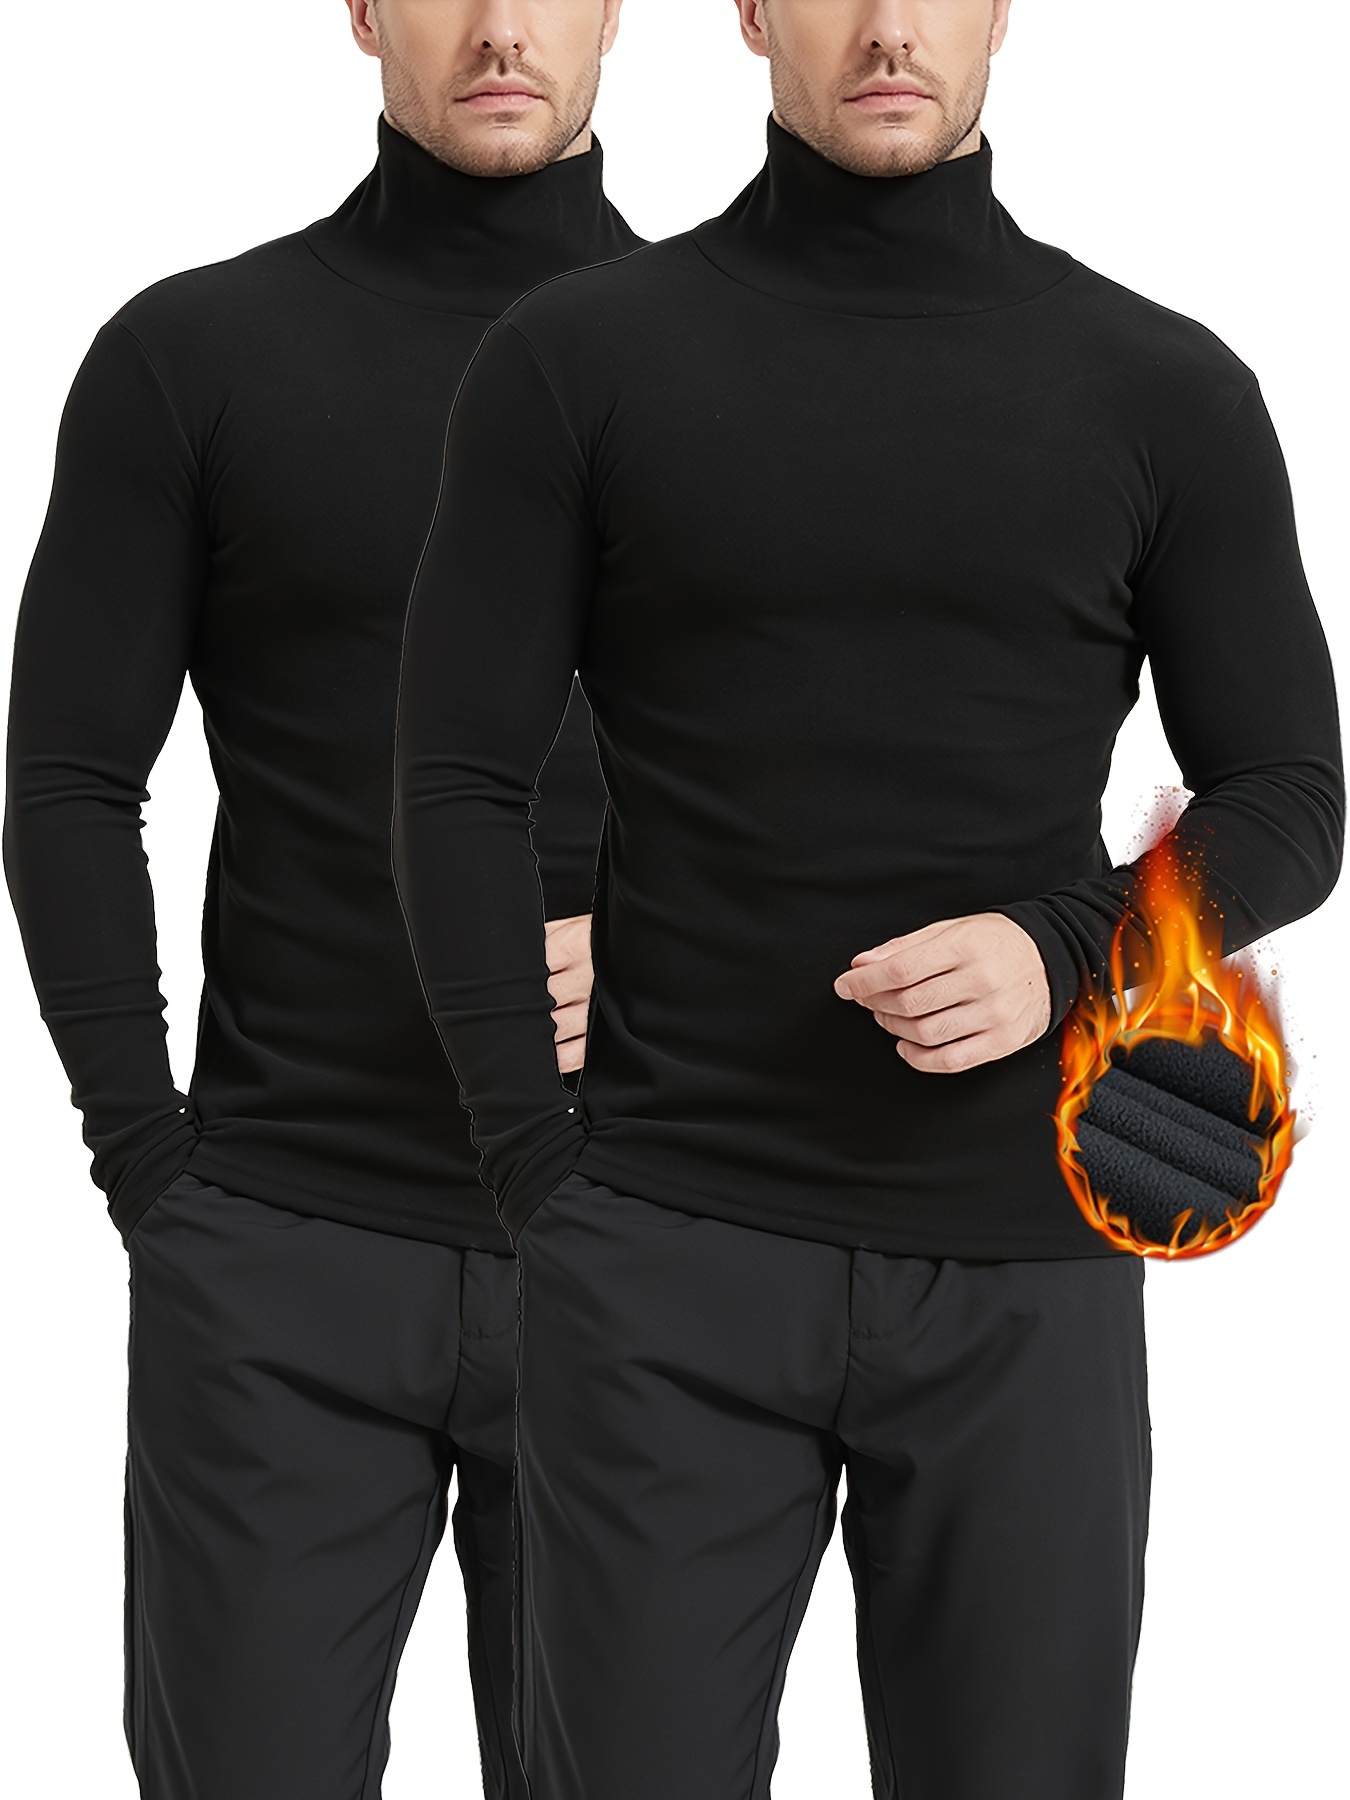 Stay Warm And Comfortable All Winter With Men's High Stretch